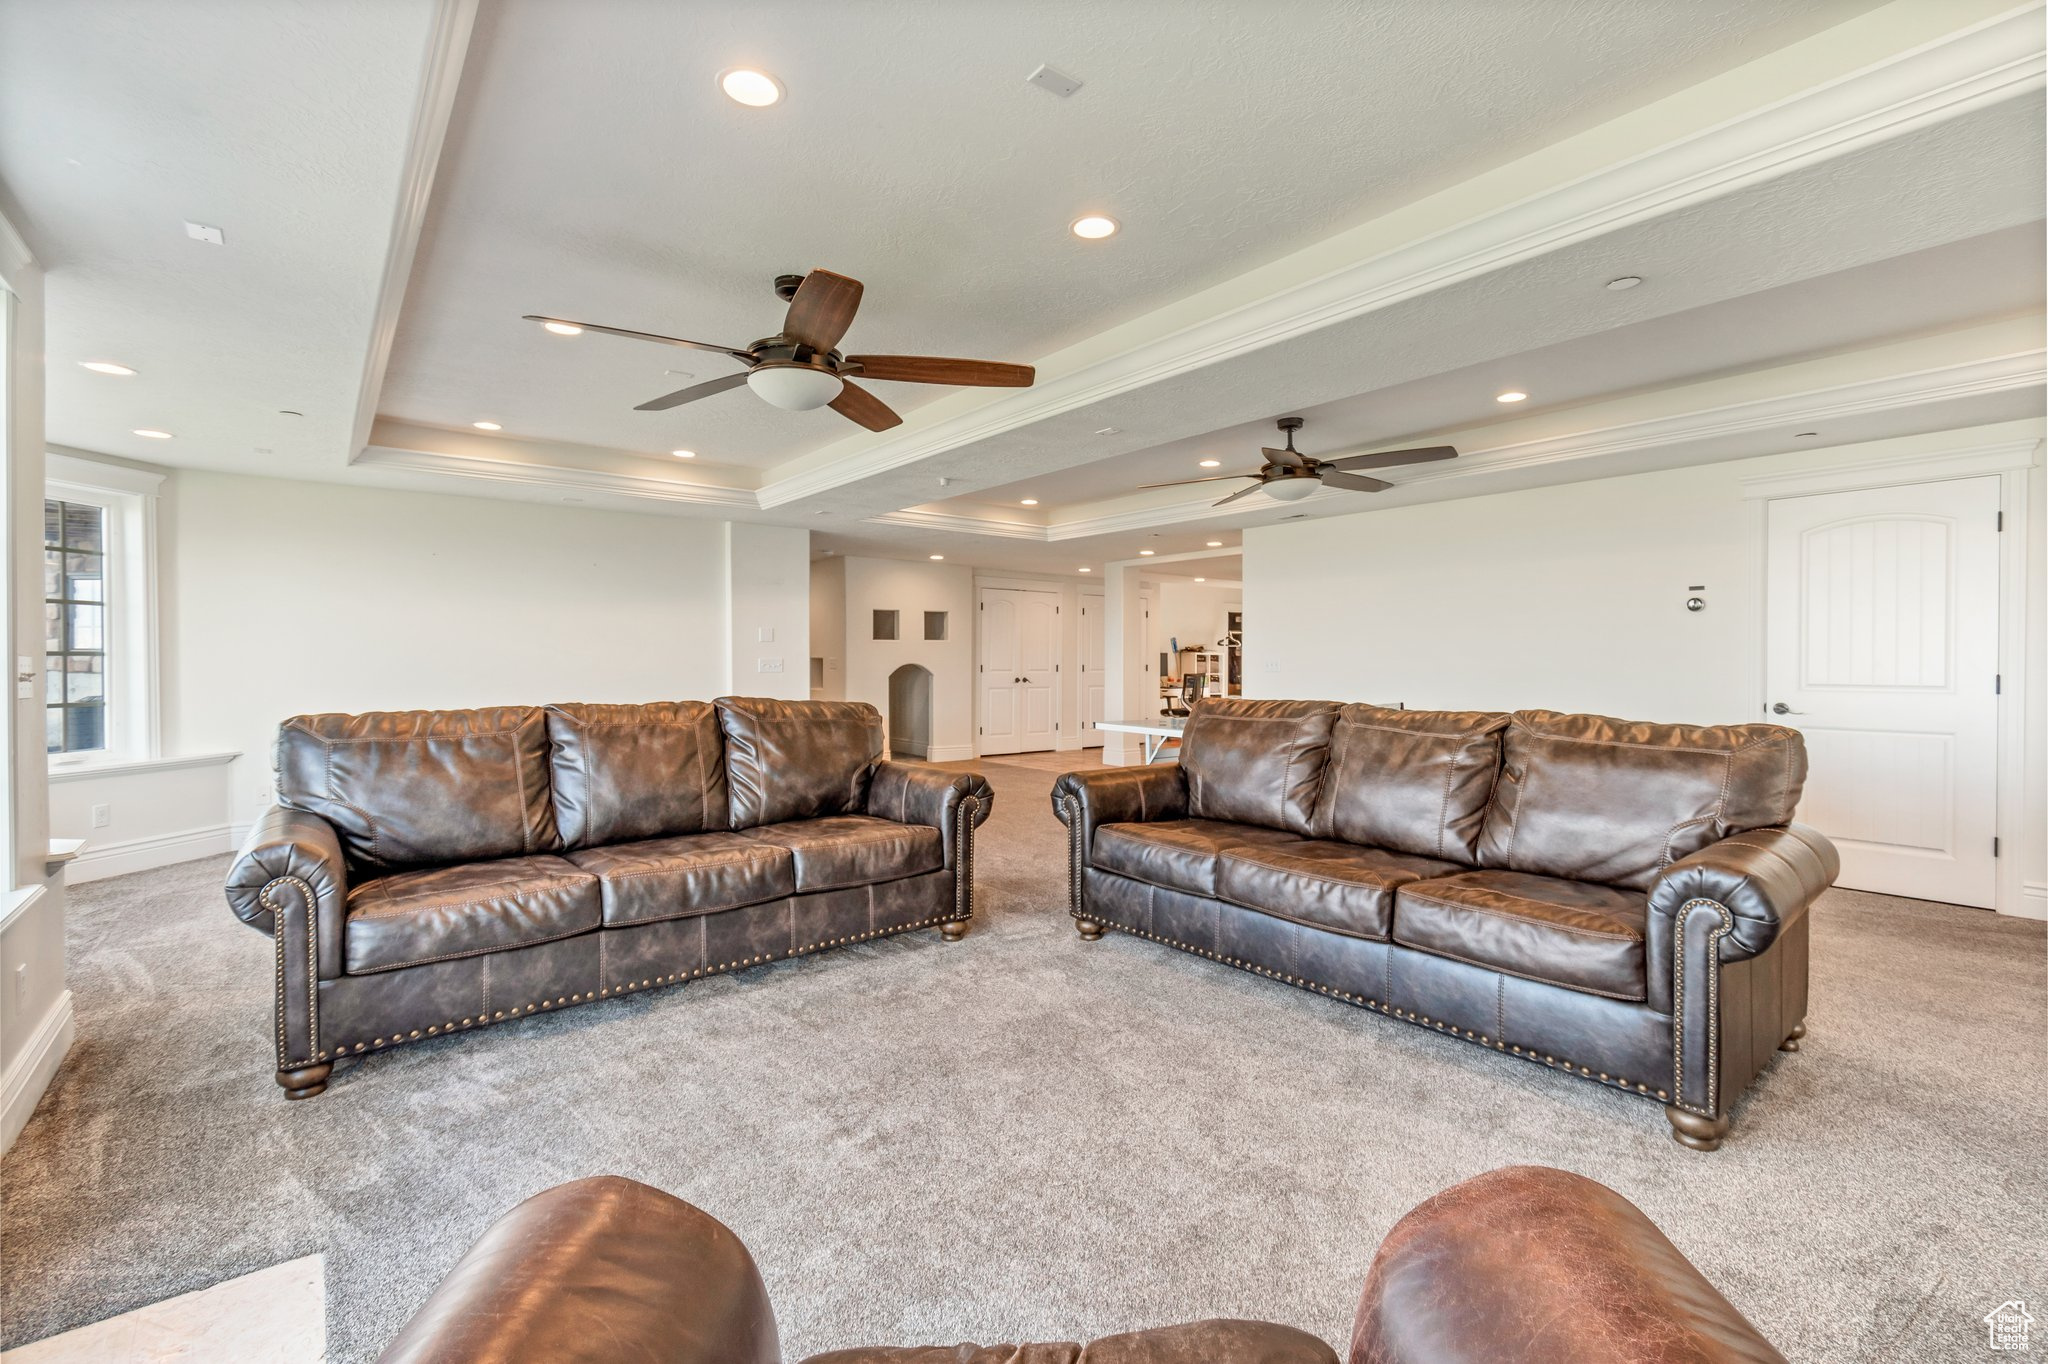 Living room with ceiling fan, carpet floors, and a tray ceiling